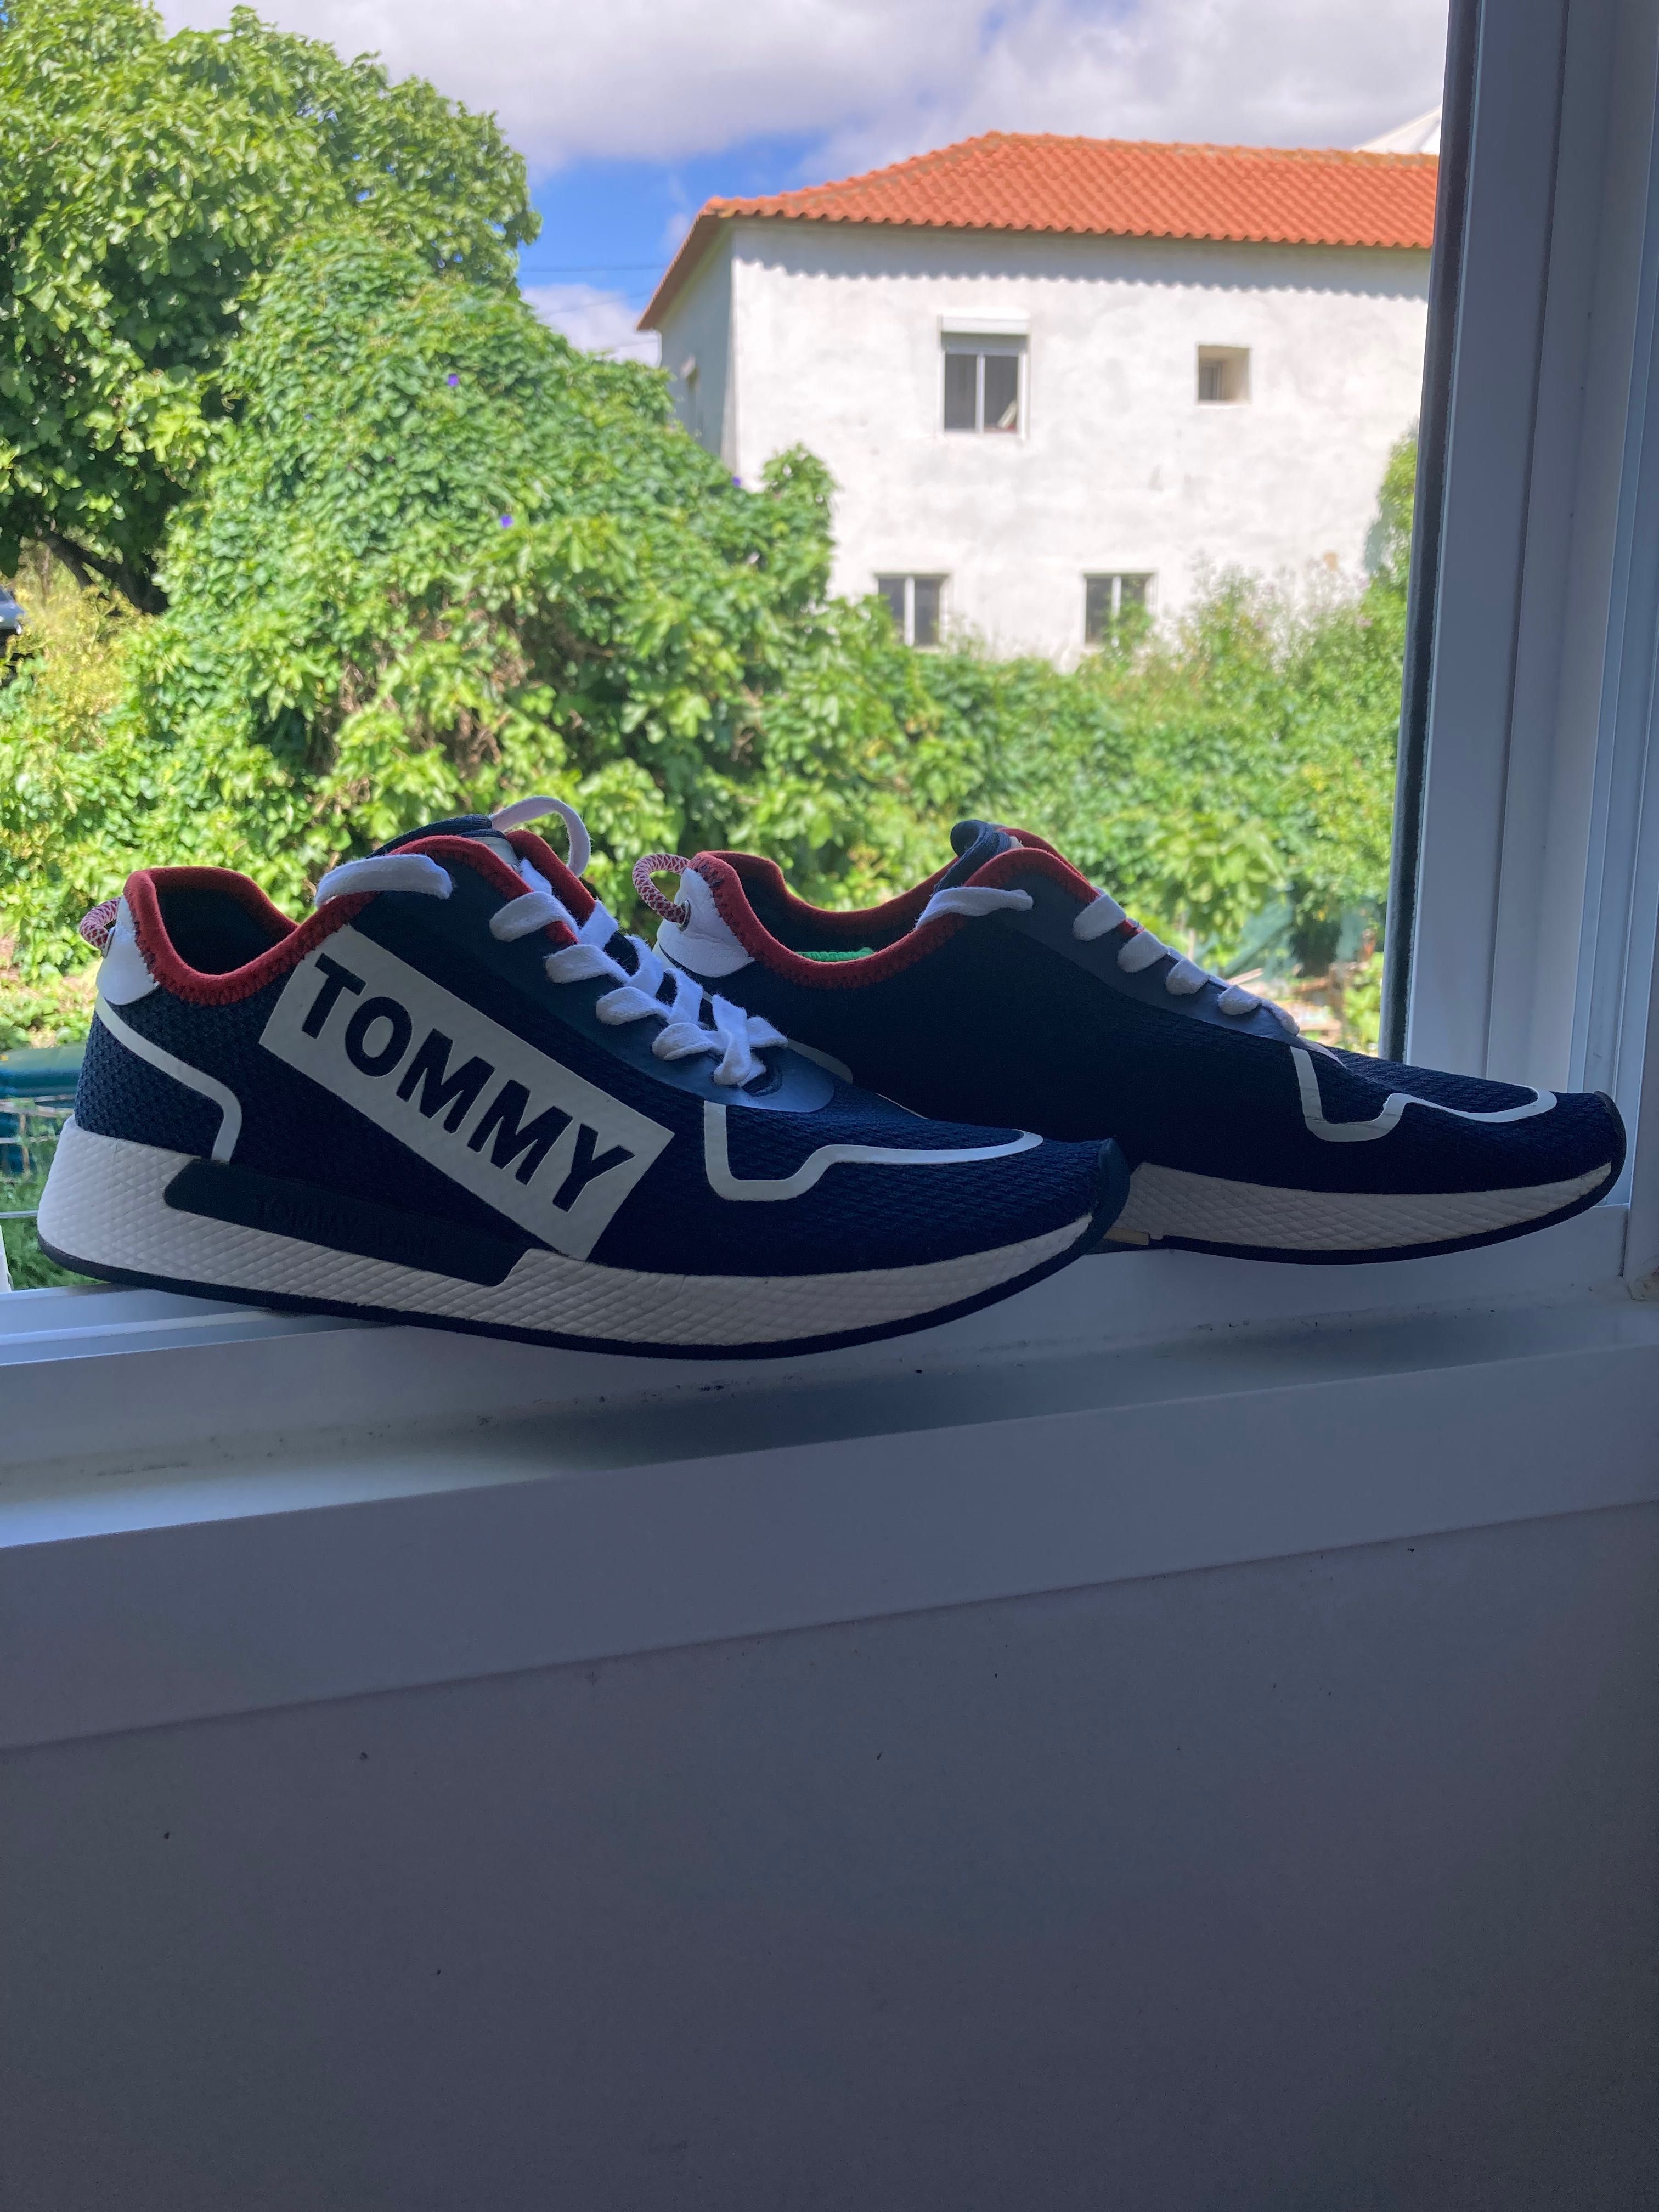 Tommy jeans x Adidas